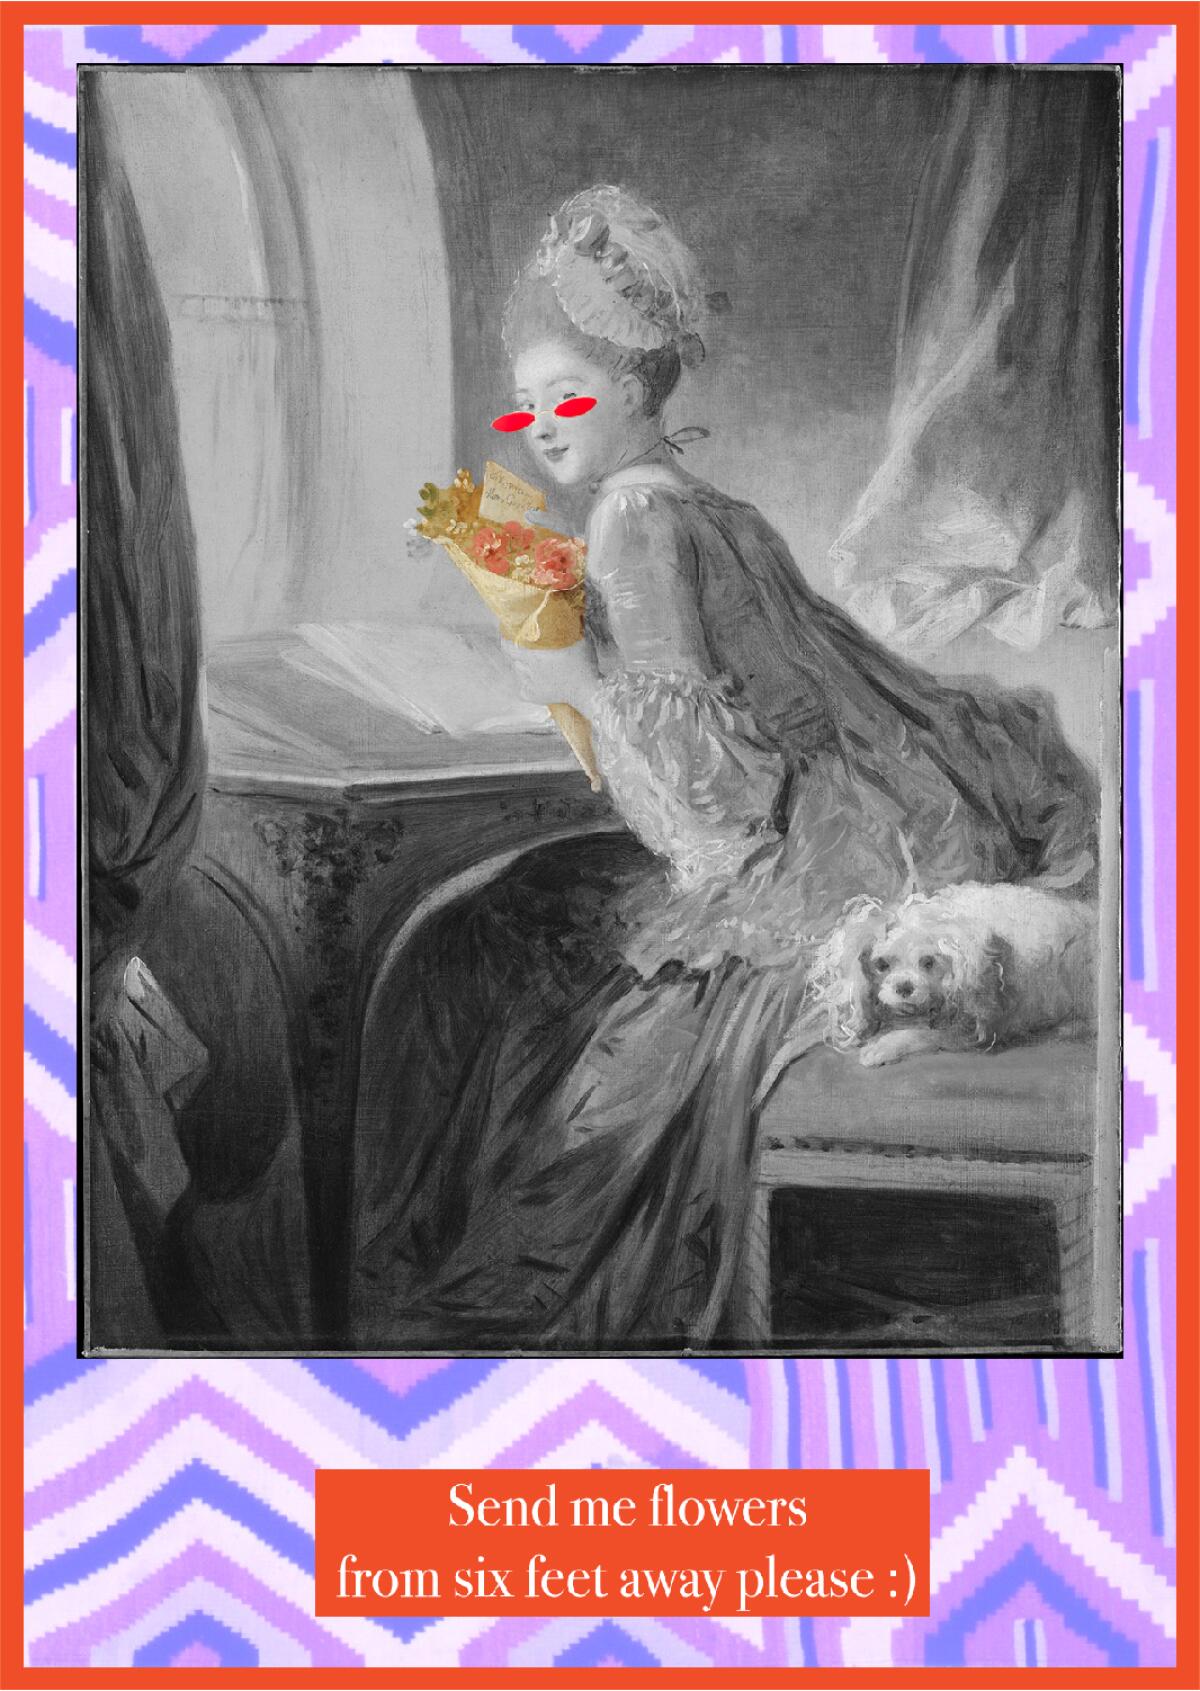 Photo collage featuring Jean Honoré Fragonard's "The Love Letter" 